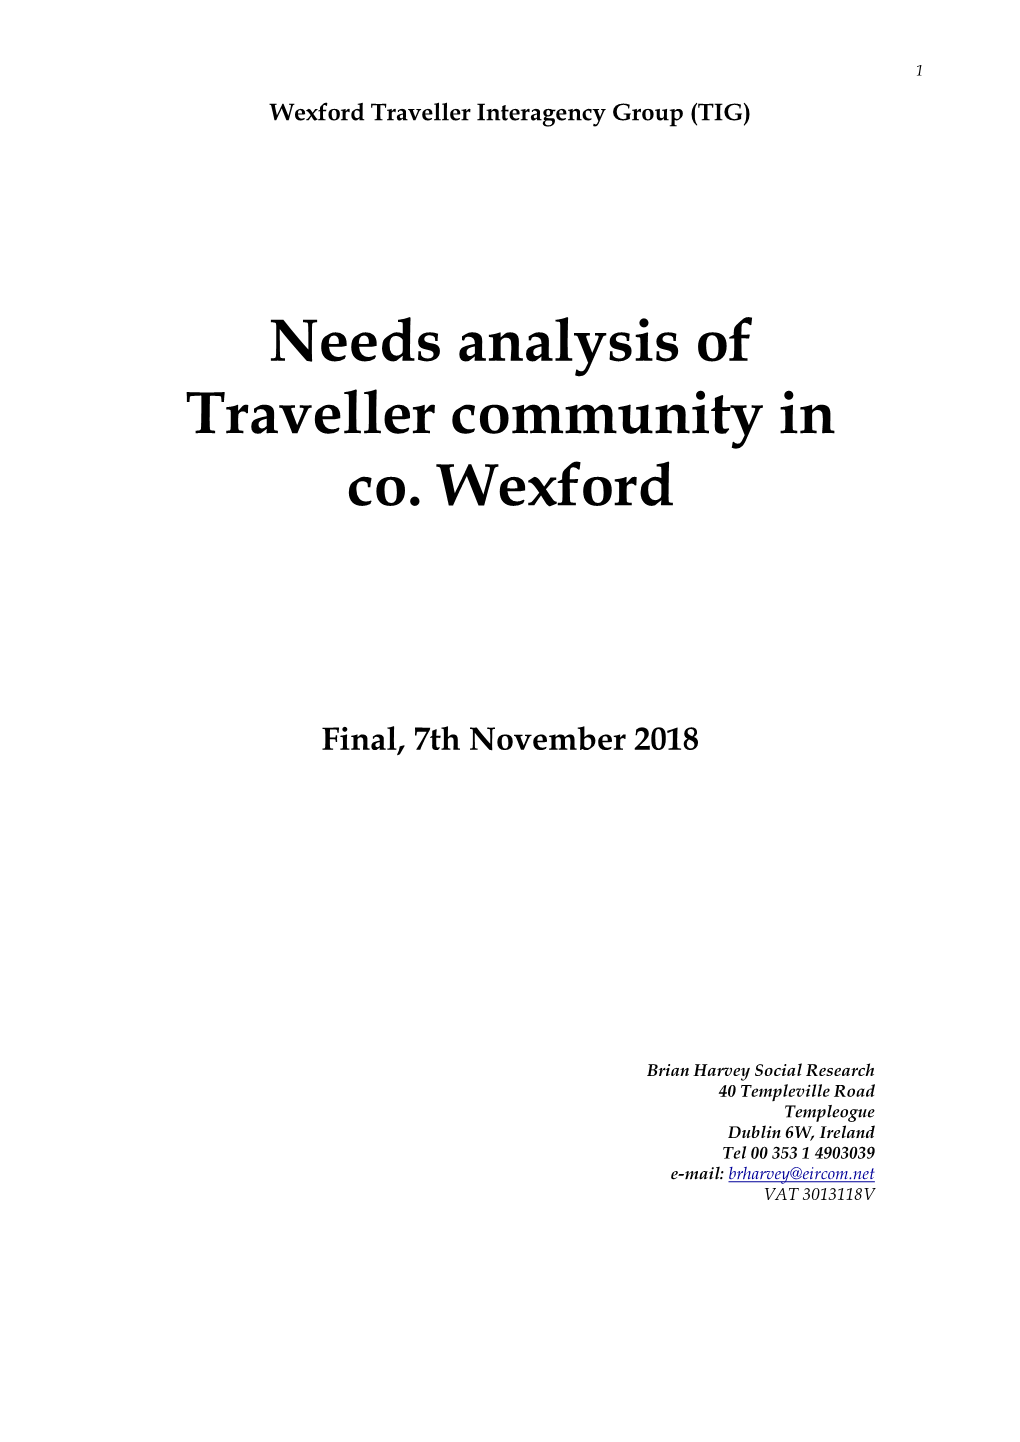 Needs Analysis of Traveller Community in Co. Wexford